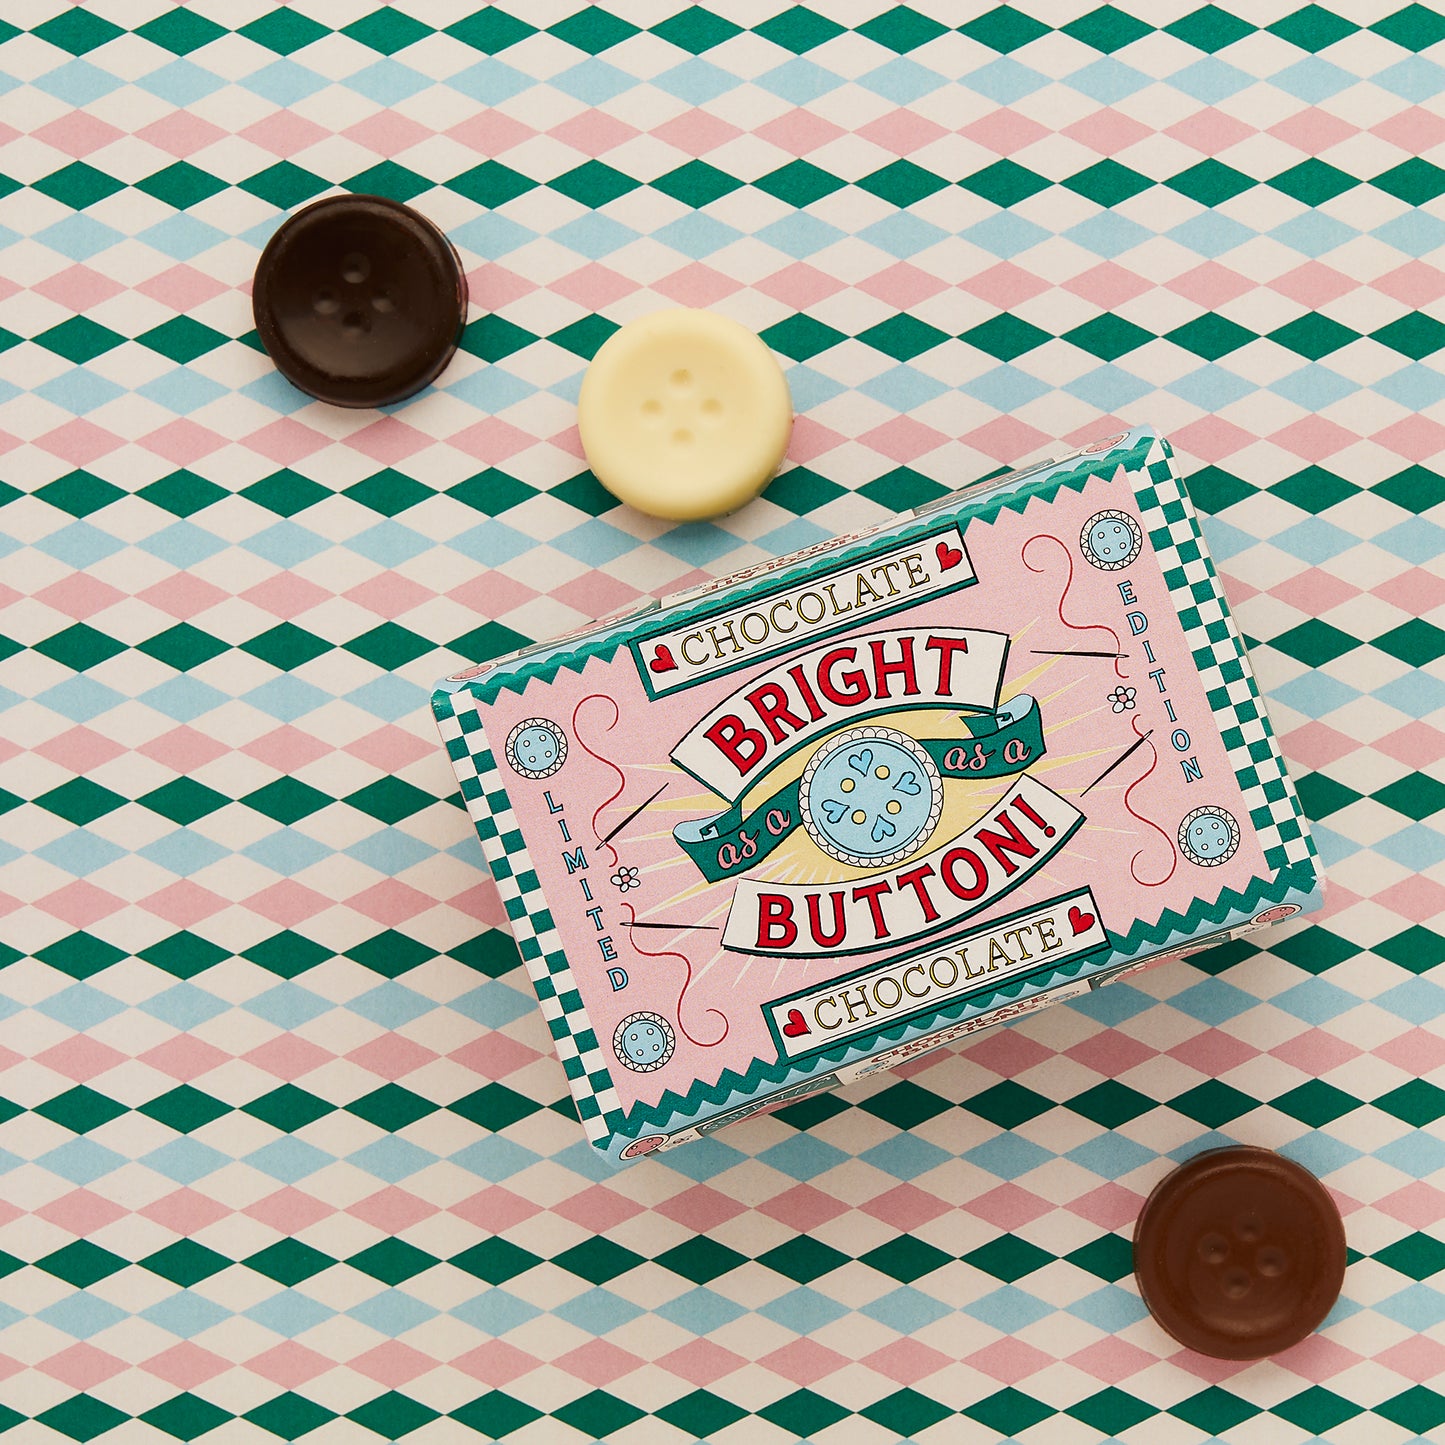 Bright as a Chocolate Button!